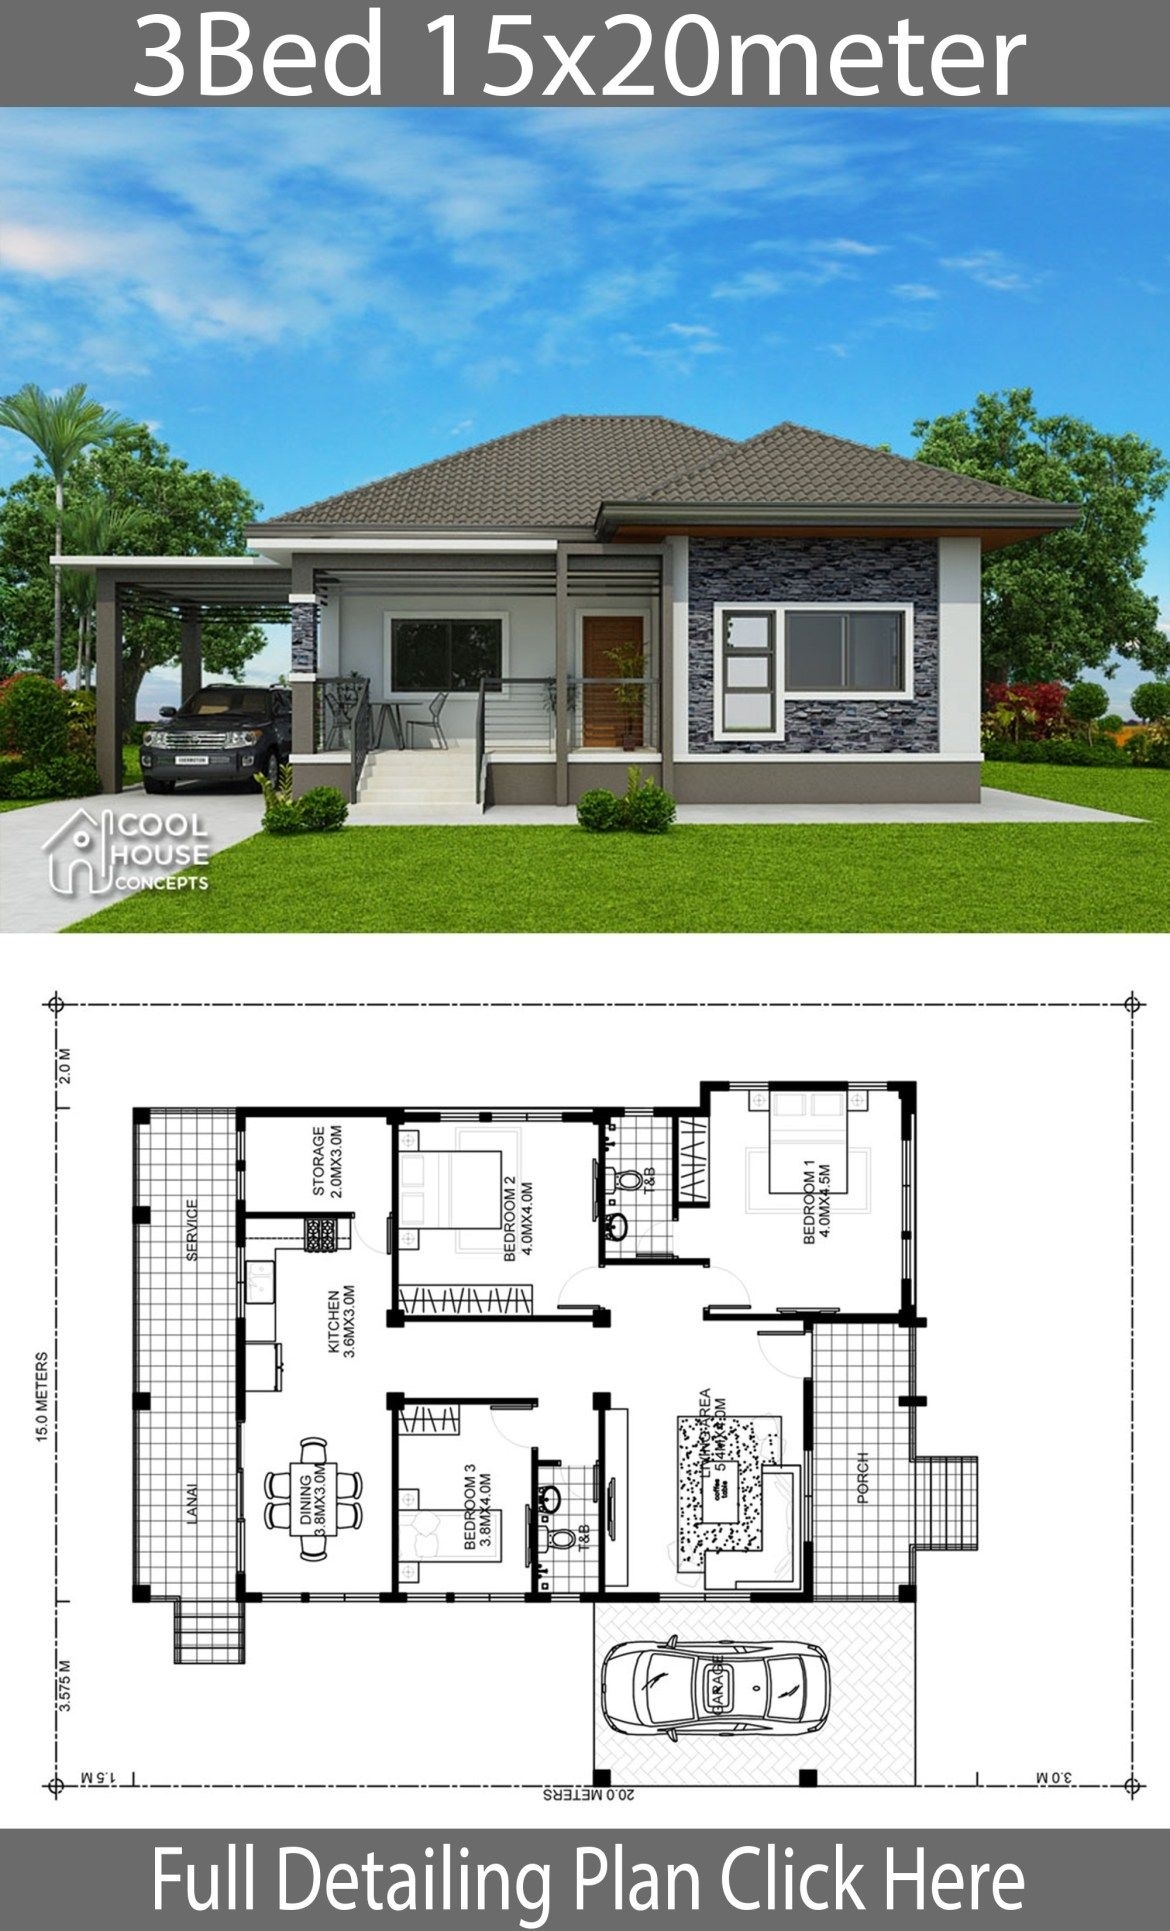 Interesting home design plan 15x20m with 3 bedrooms home planssearch | simple with marvelous simple house designs 3 bedrooms